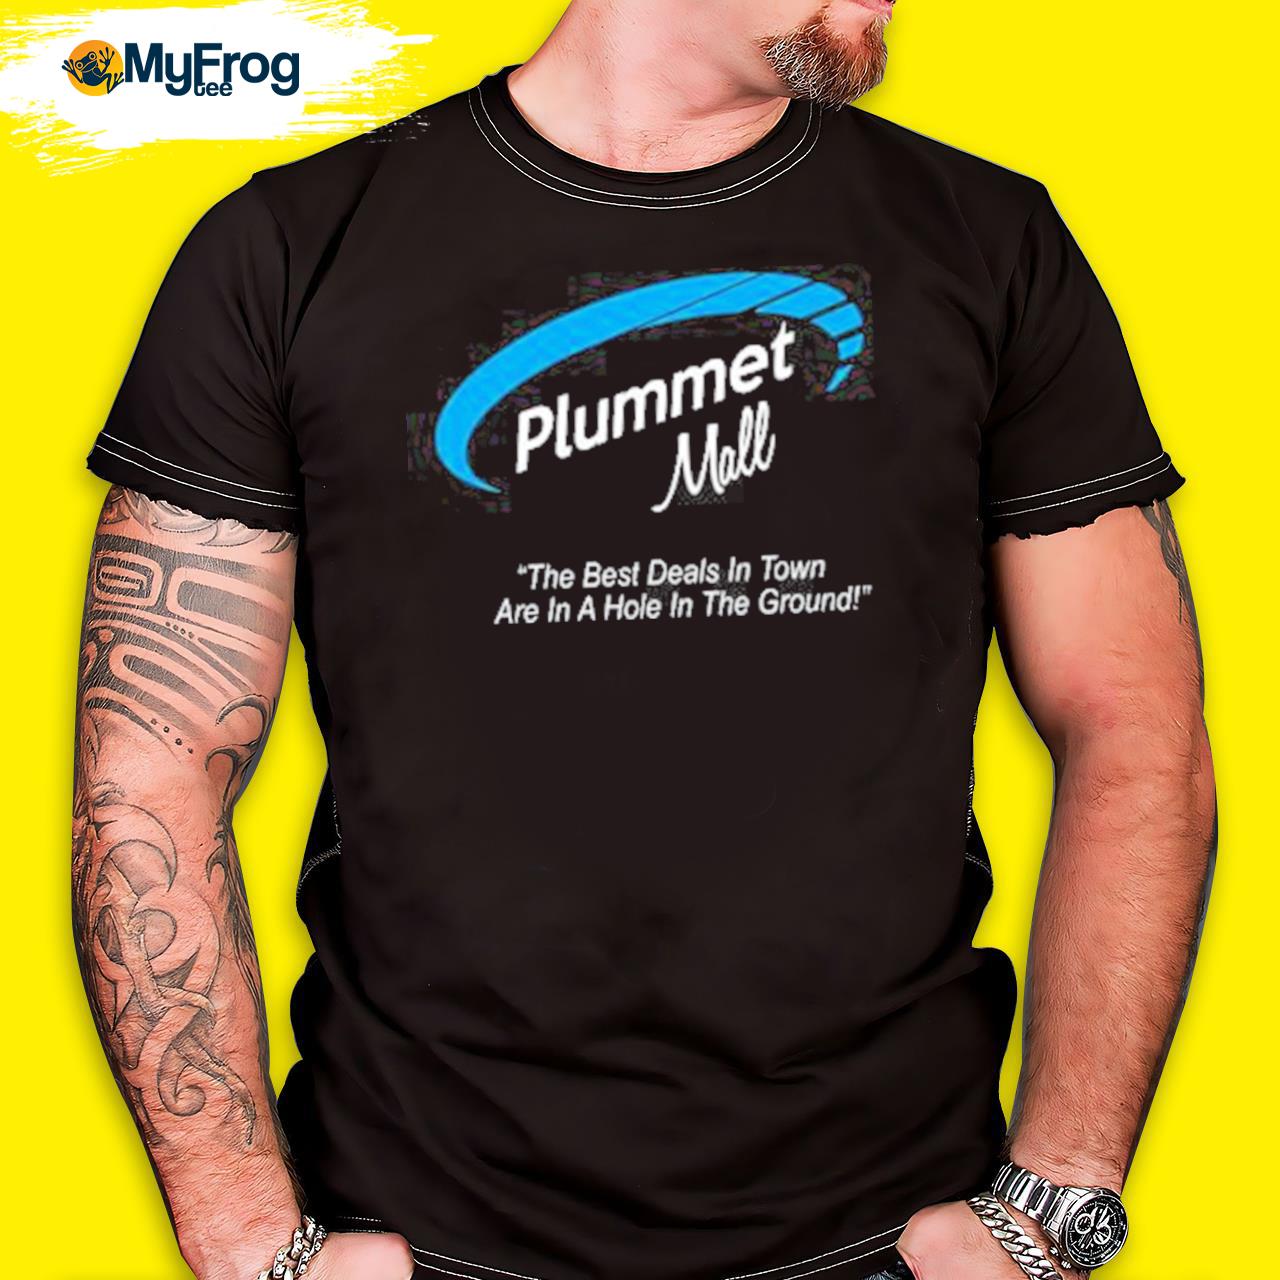 https://images.myfrogtees.com/2023/01/plummet-mall-the-best-deals-in-town-are-in-a-hole-in-the-ground-shirt-shirt.jpg